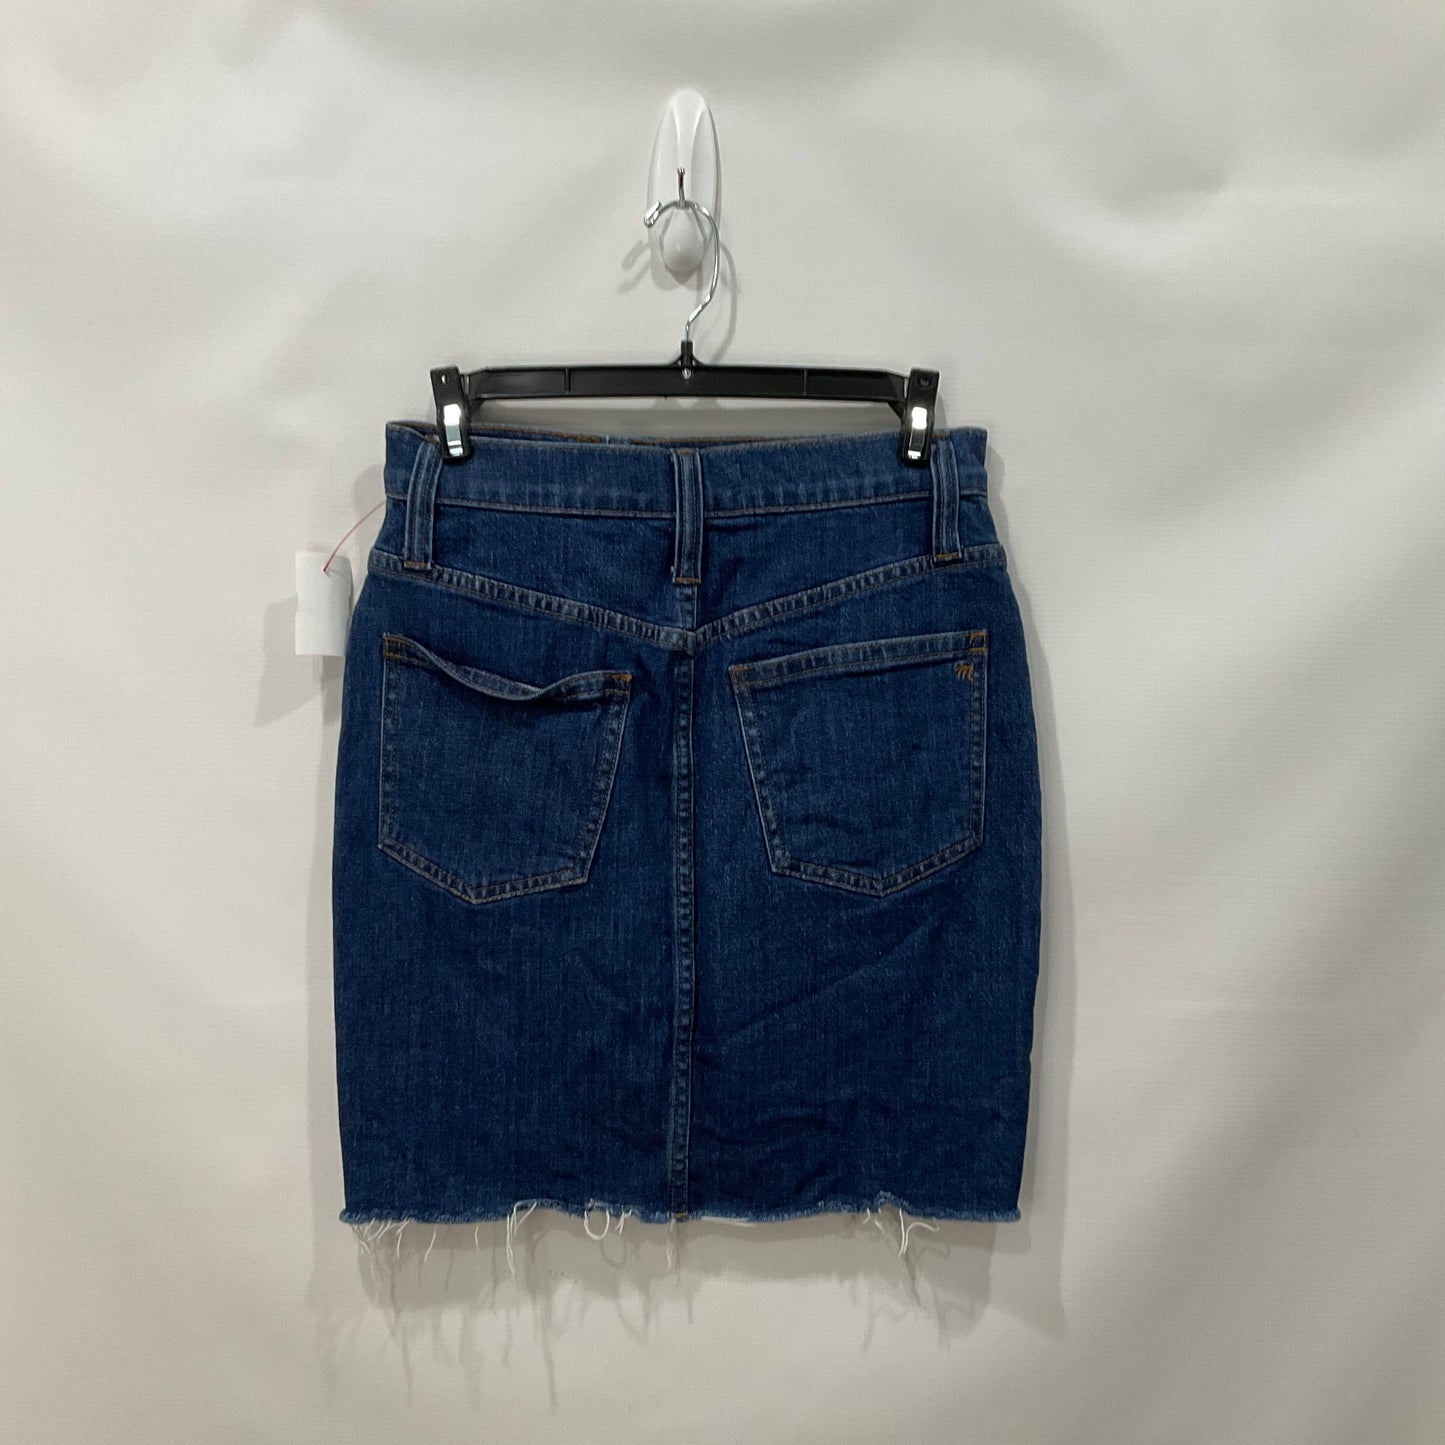 Skirt Mini & Short By Madewell  Size: 0